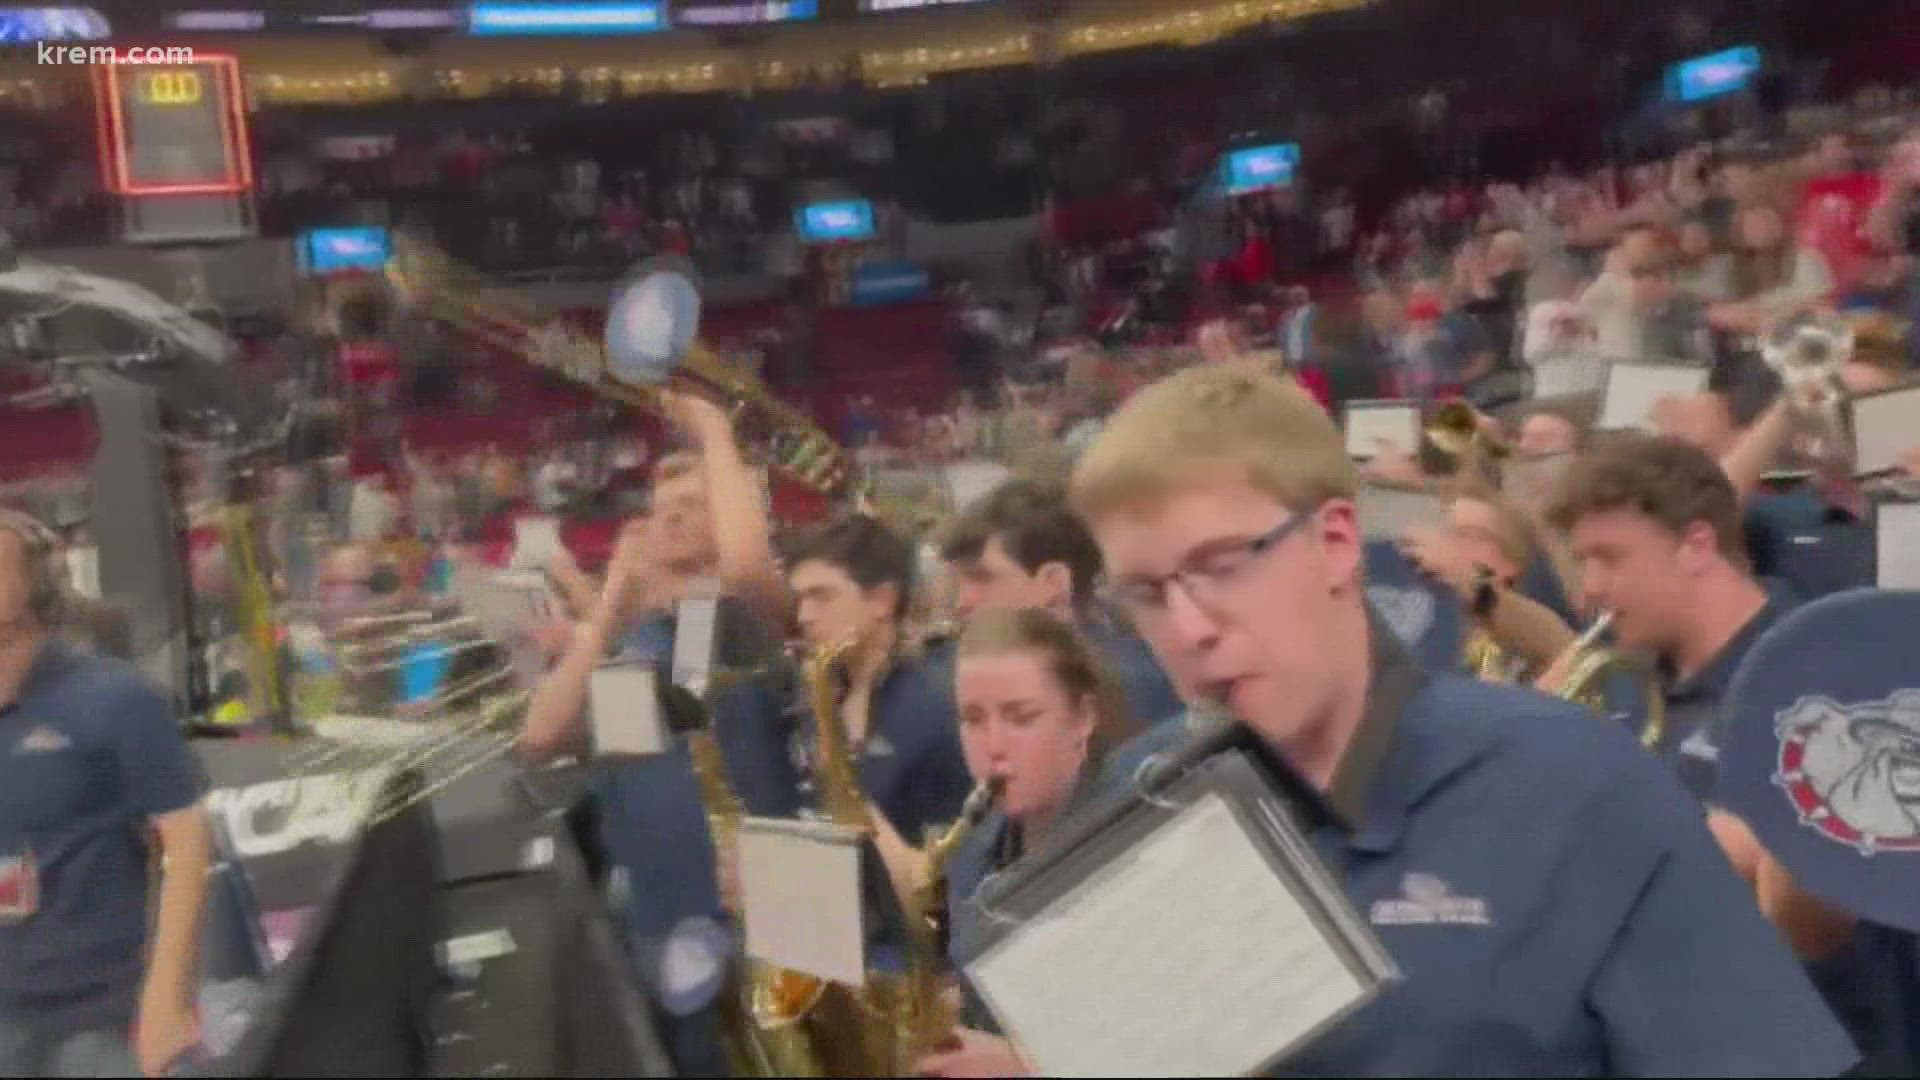 After spending two years watching from home, the Gonzaga Bulldog Band is finally hitting the road once again to cheer their team on for March Madness.